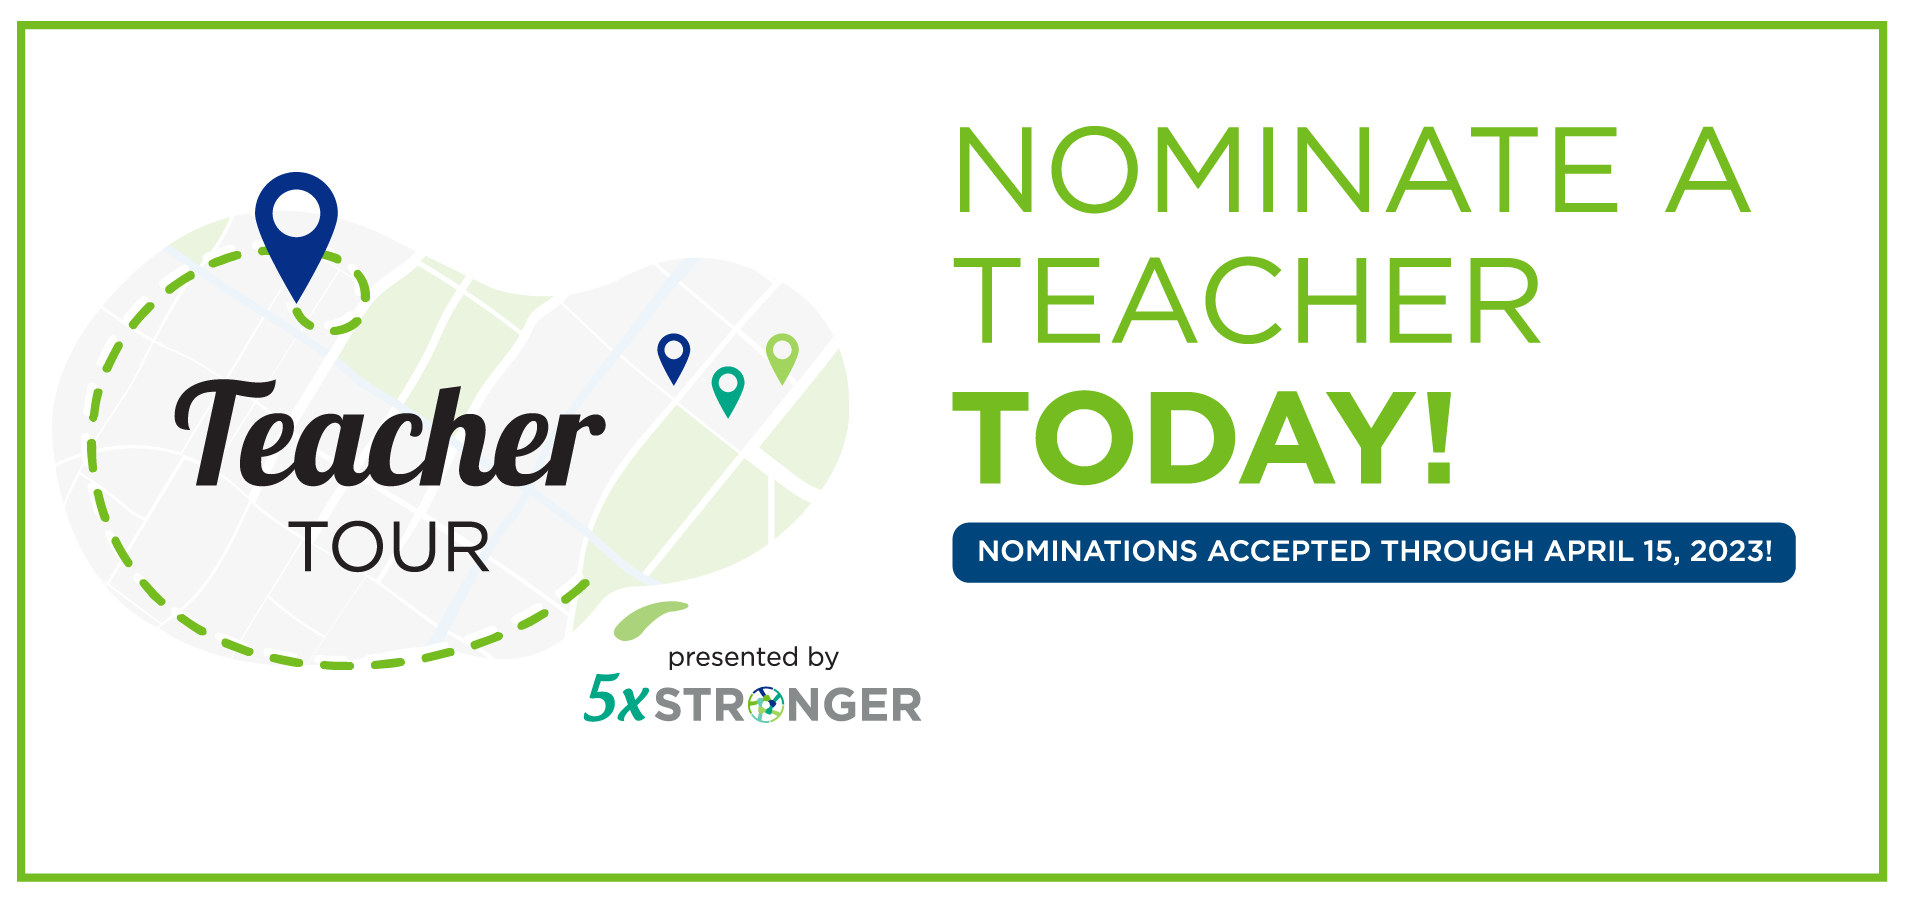 Nominate a teacher today for the Teacher Tour presented by 5x Stronger! Nominations accepted through April 15, 2023.